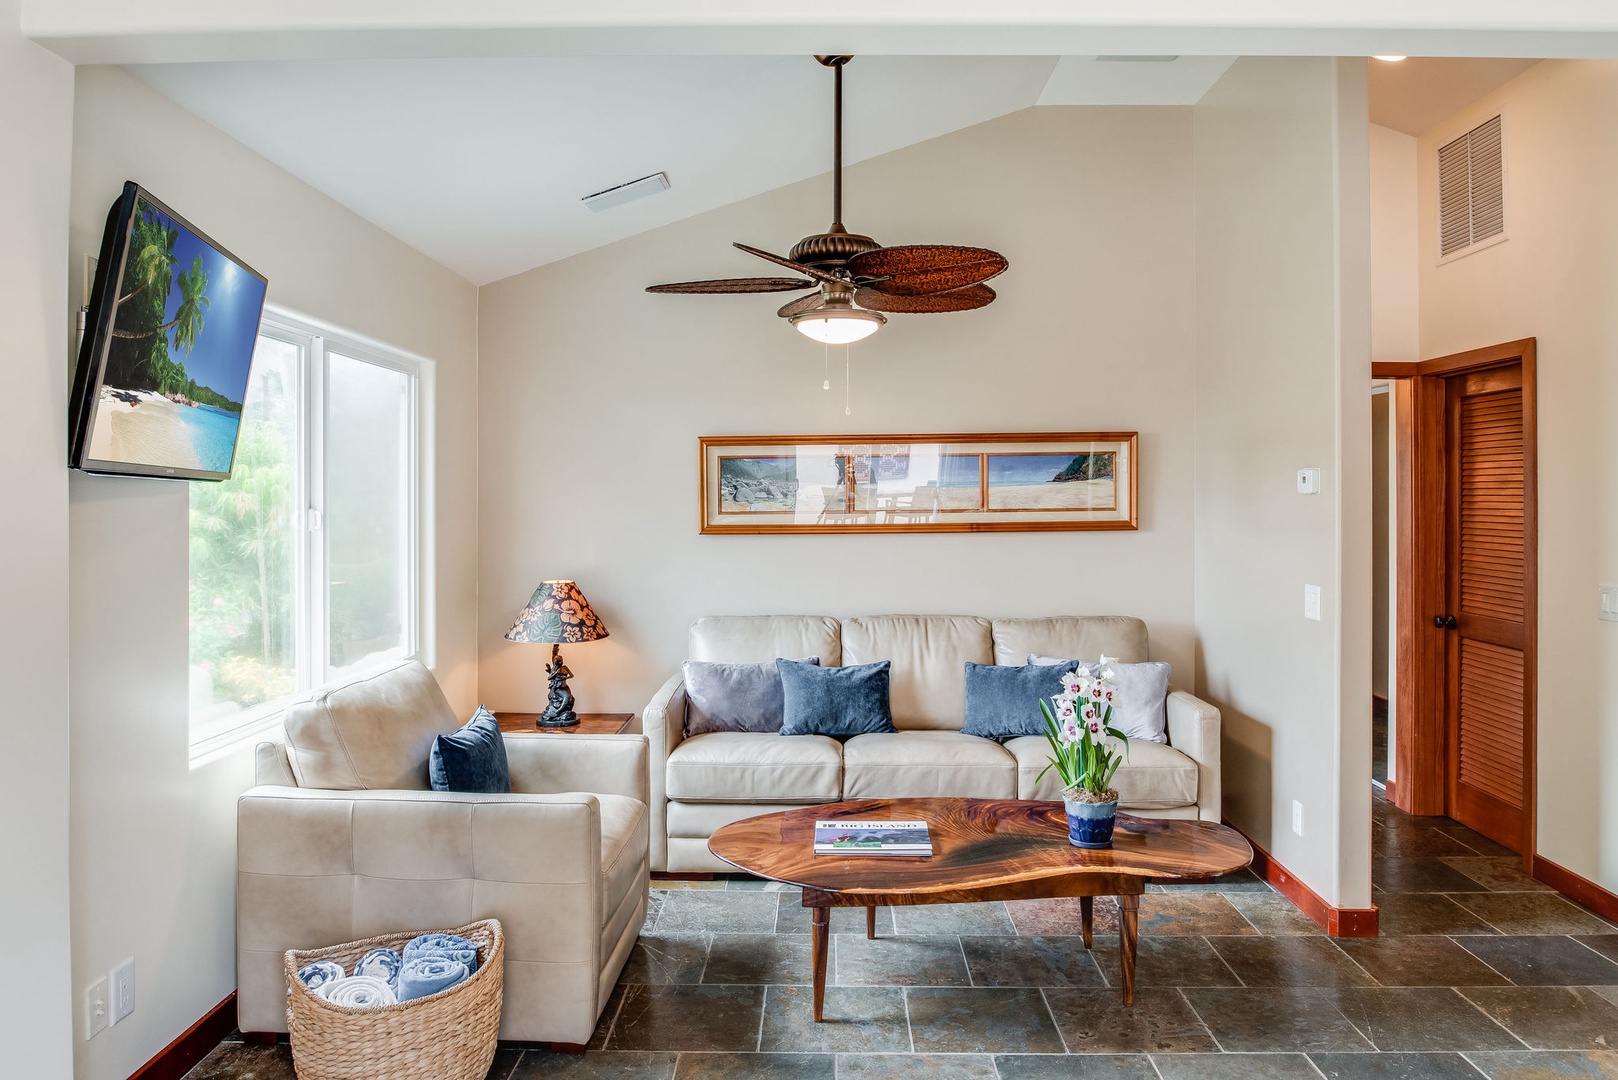 Kailua Kona Vacation Rentals, Kona Beach Bungalows** - Sink into comfort in Kahakai's living area, adorned with plush sofas for ultimate relaxation.